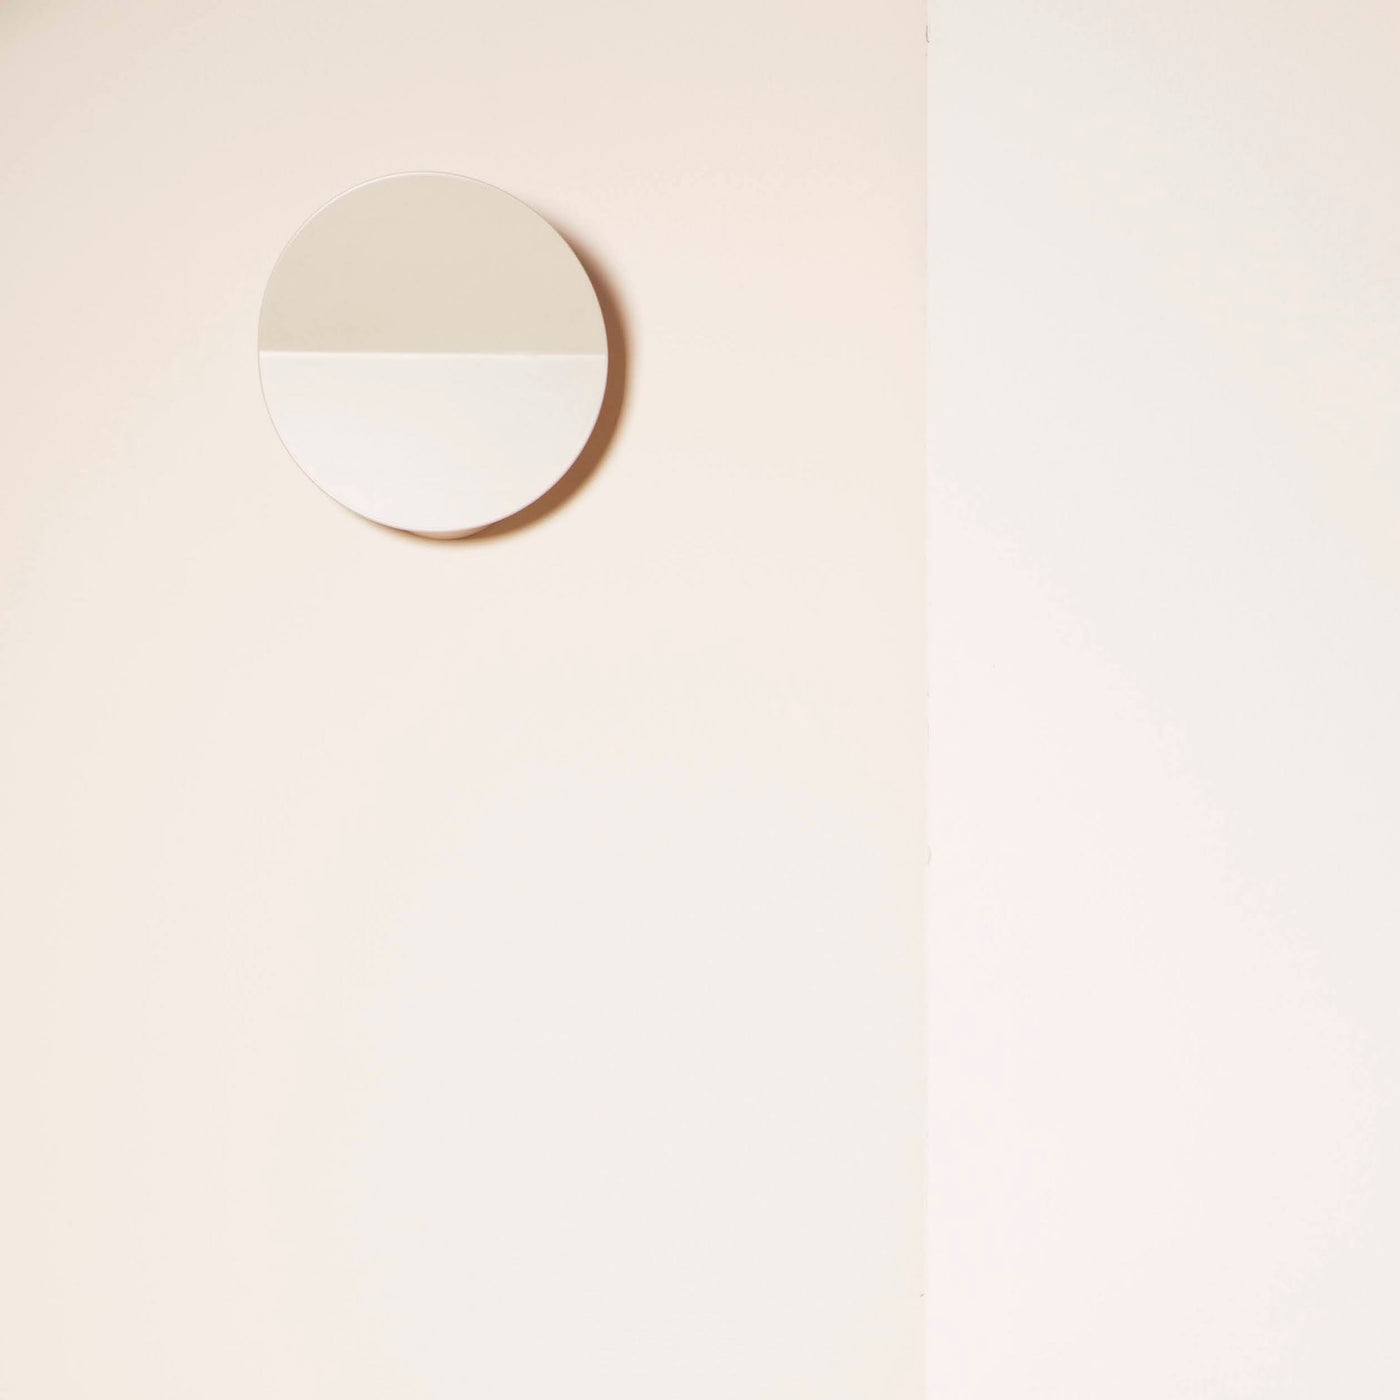 Houseof Diffuser Wall Light. British design at someday designs. #colour_sand